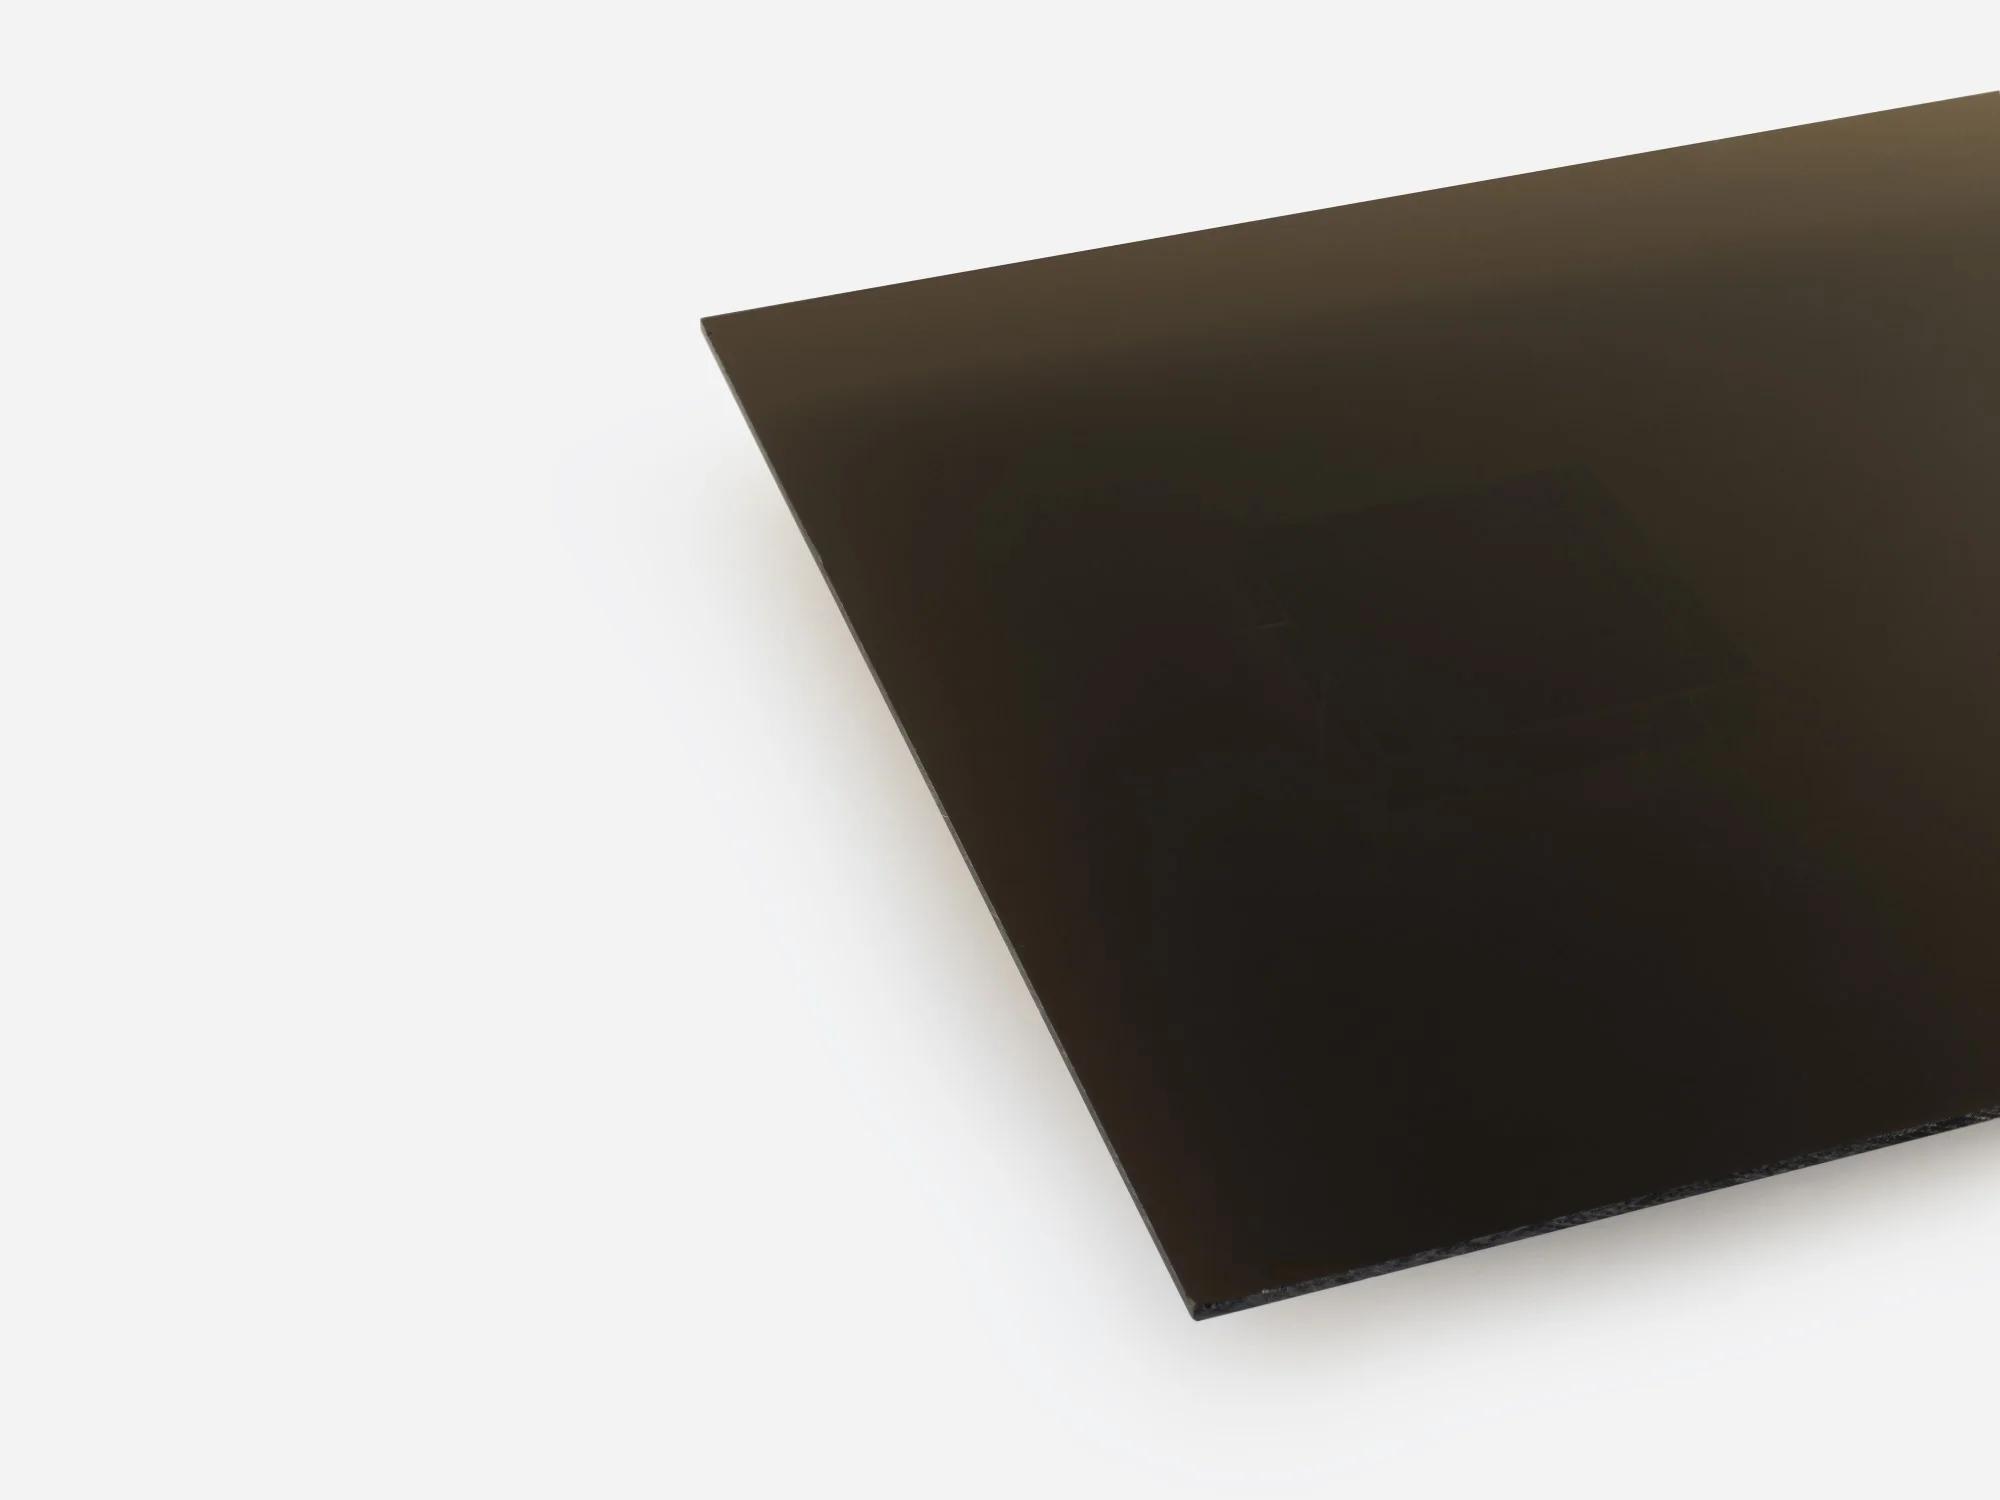 smoked acrylic panels - Which is better plastic or acrylic